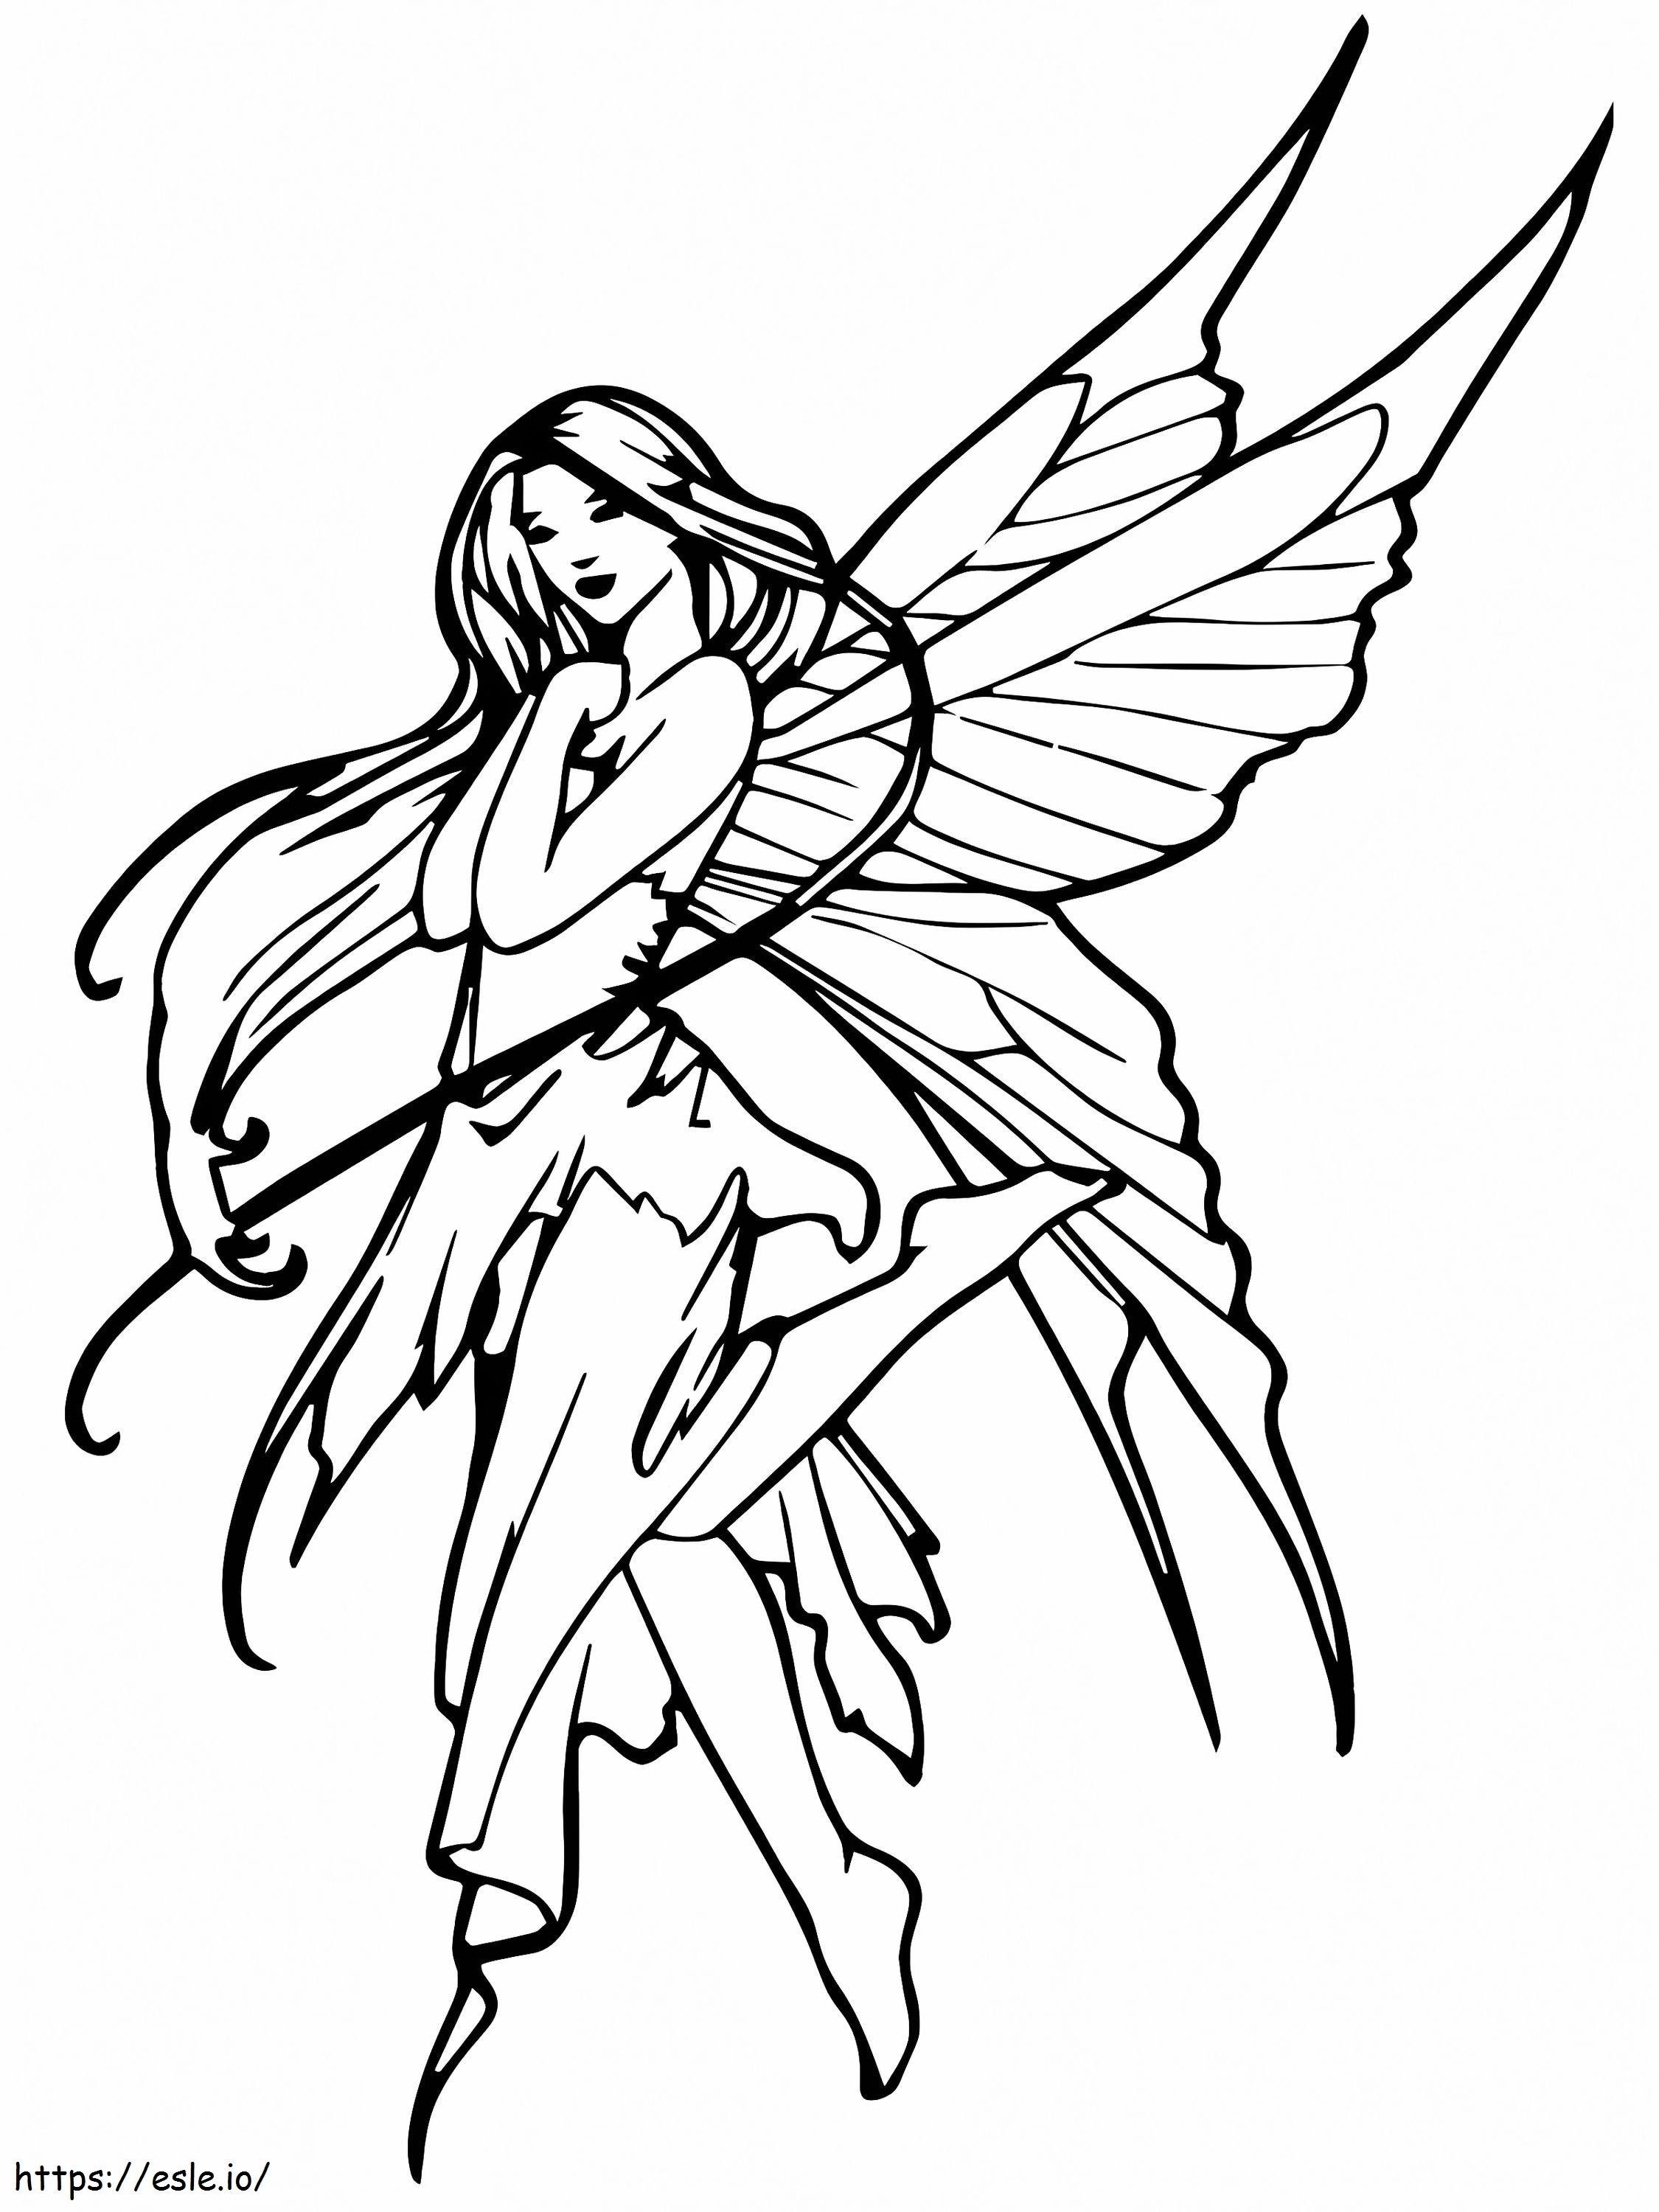 Upstanding Fairy Princess coloring page